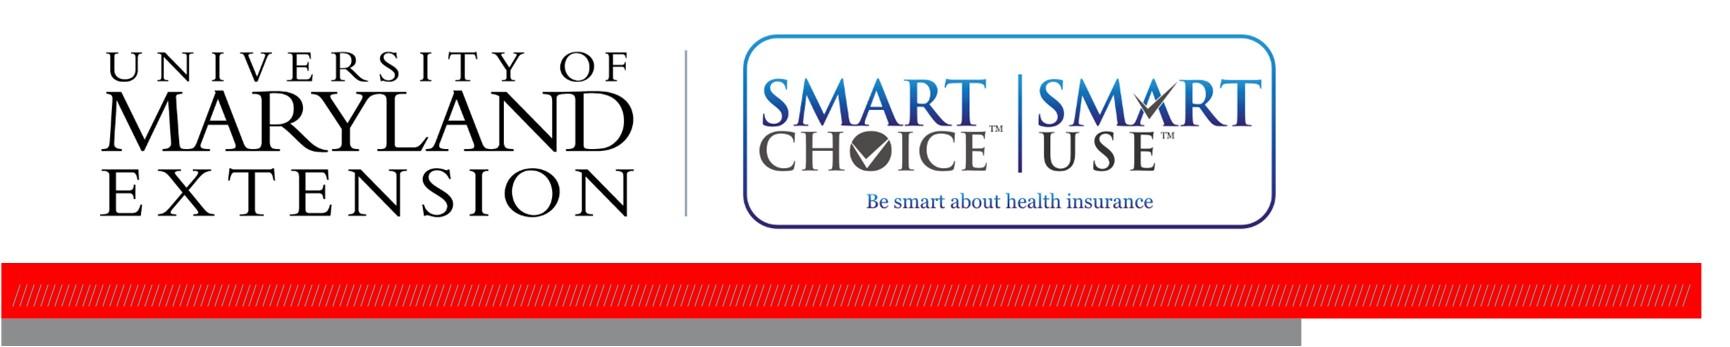 Publication header with UME and Smart Choice, Smart Use logos